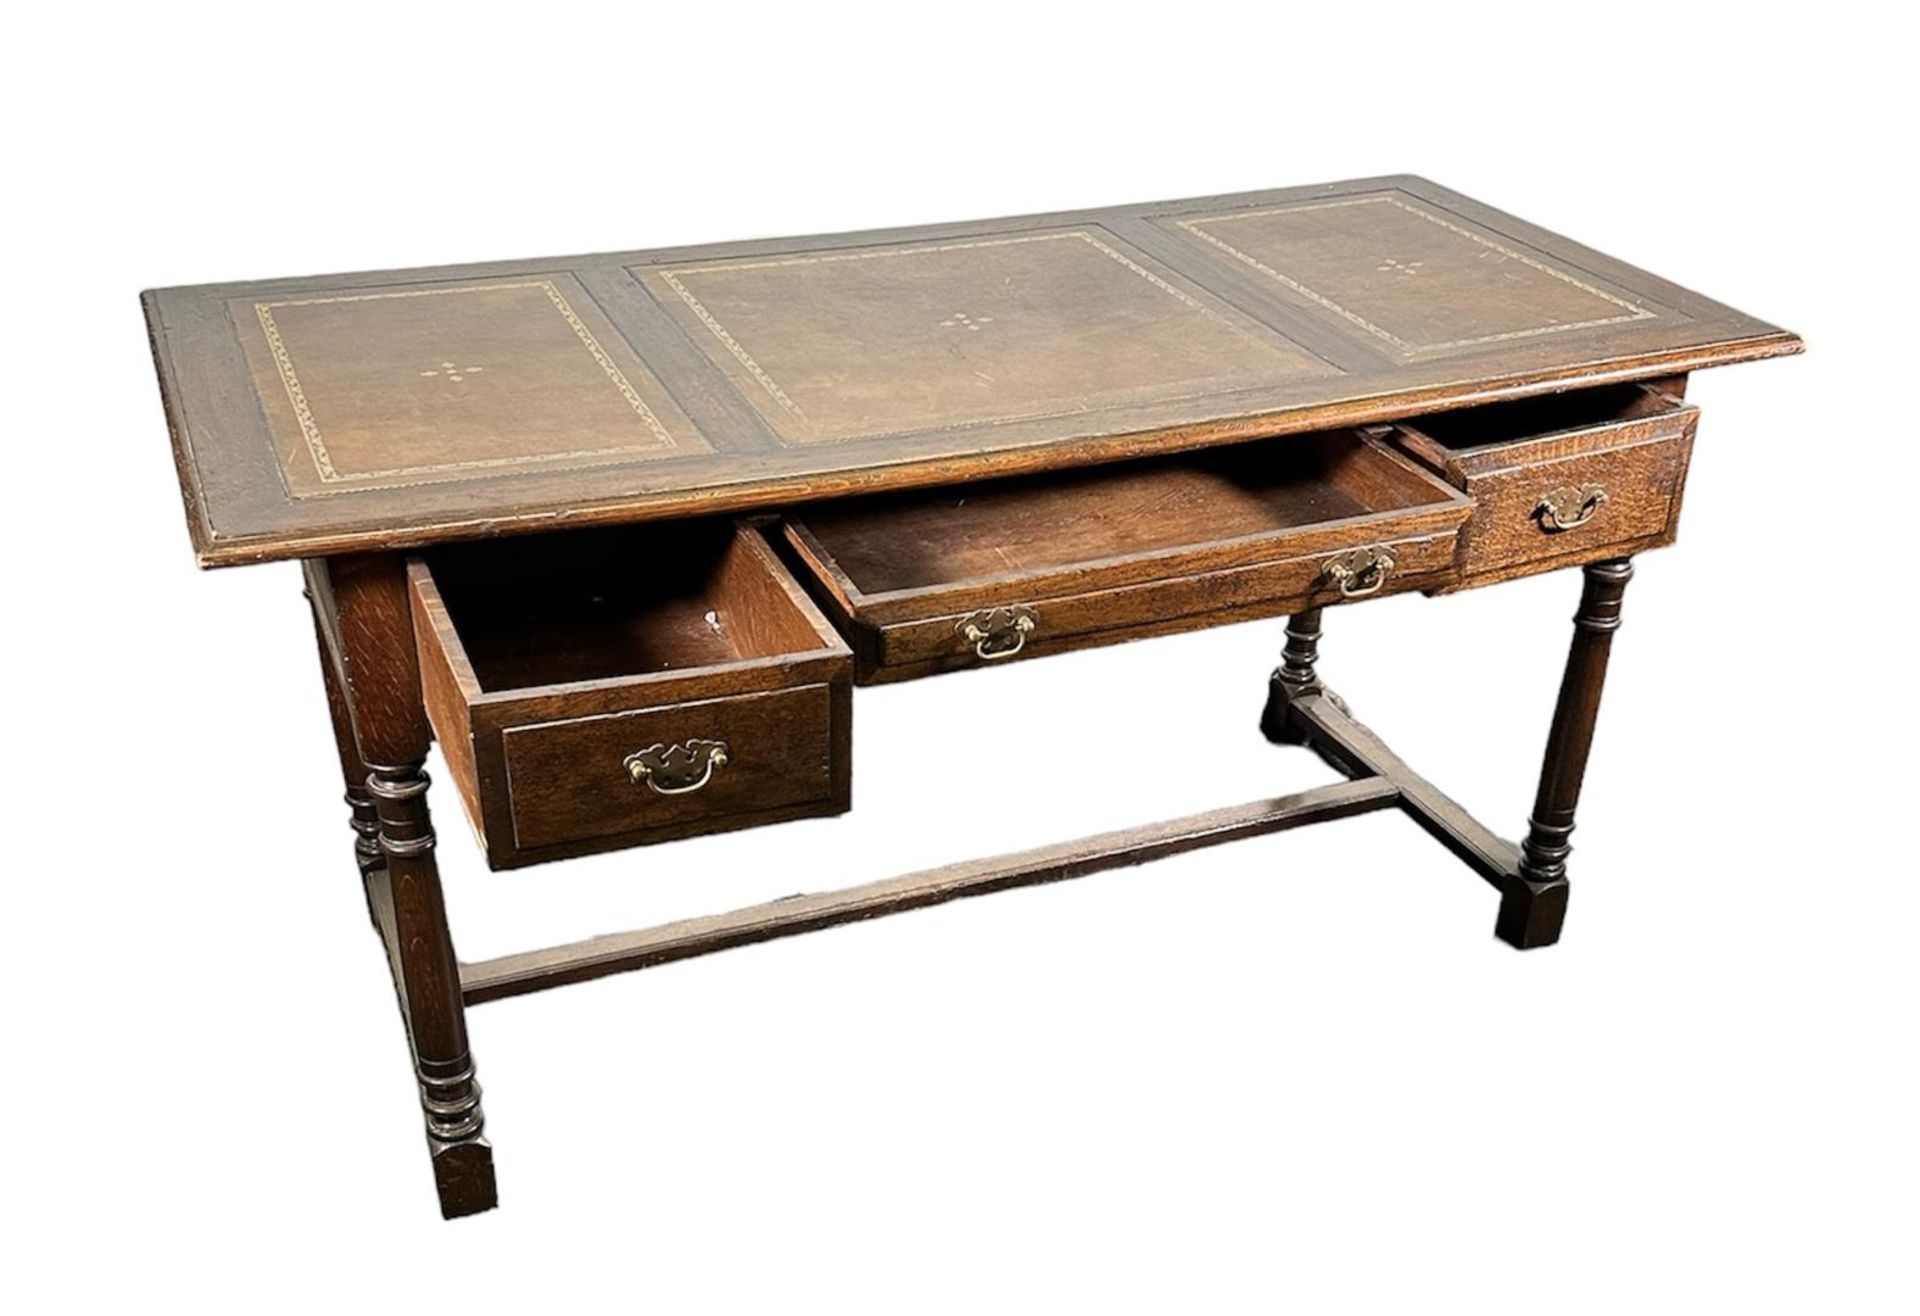 A 19th century desk with three drawers and leather inlay.
80 x 160 x 80 cm.